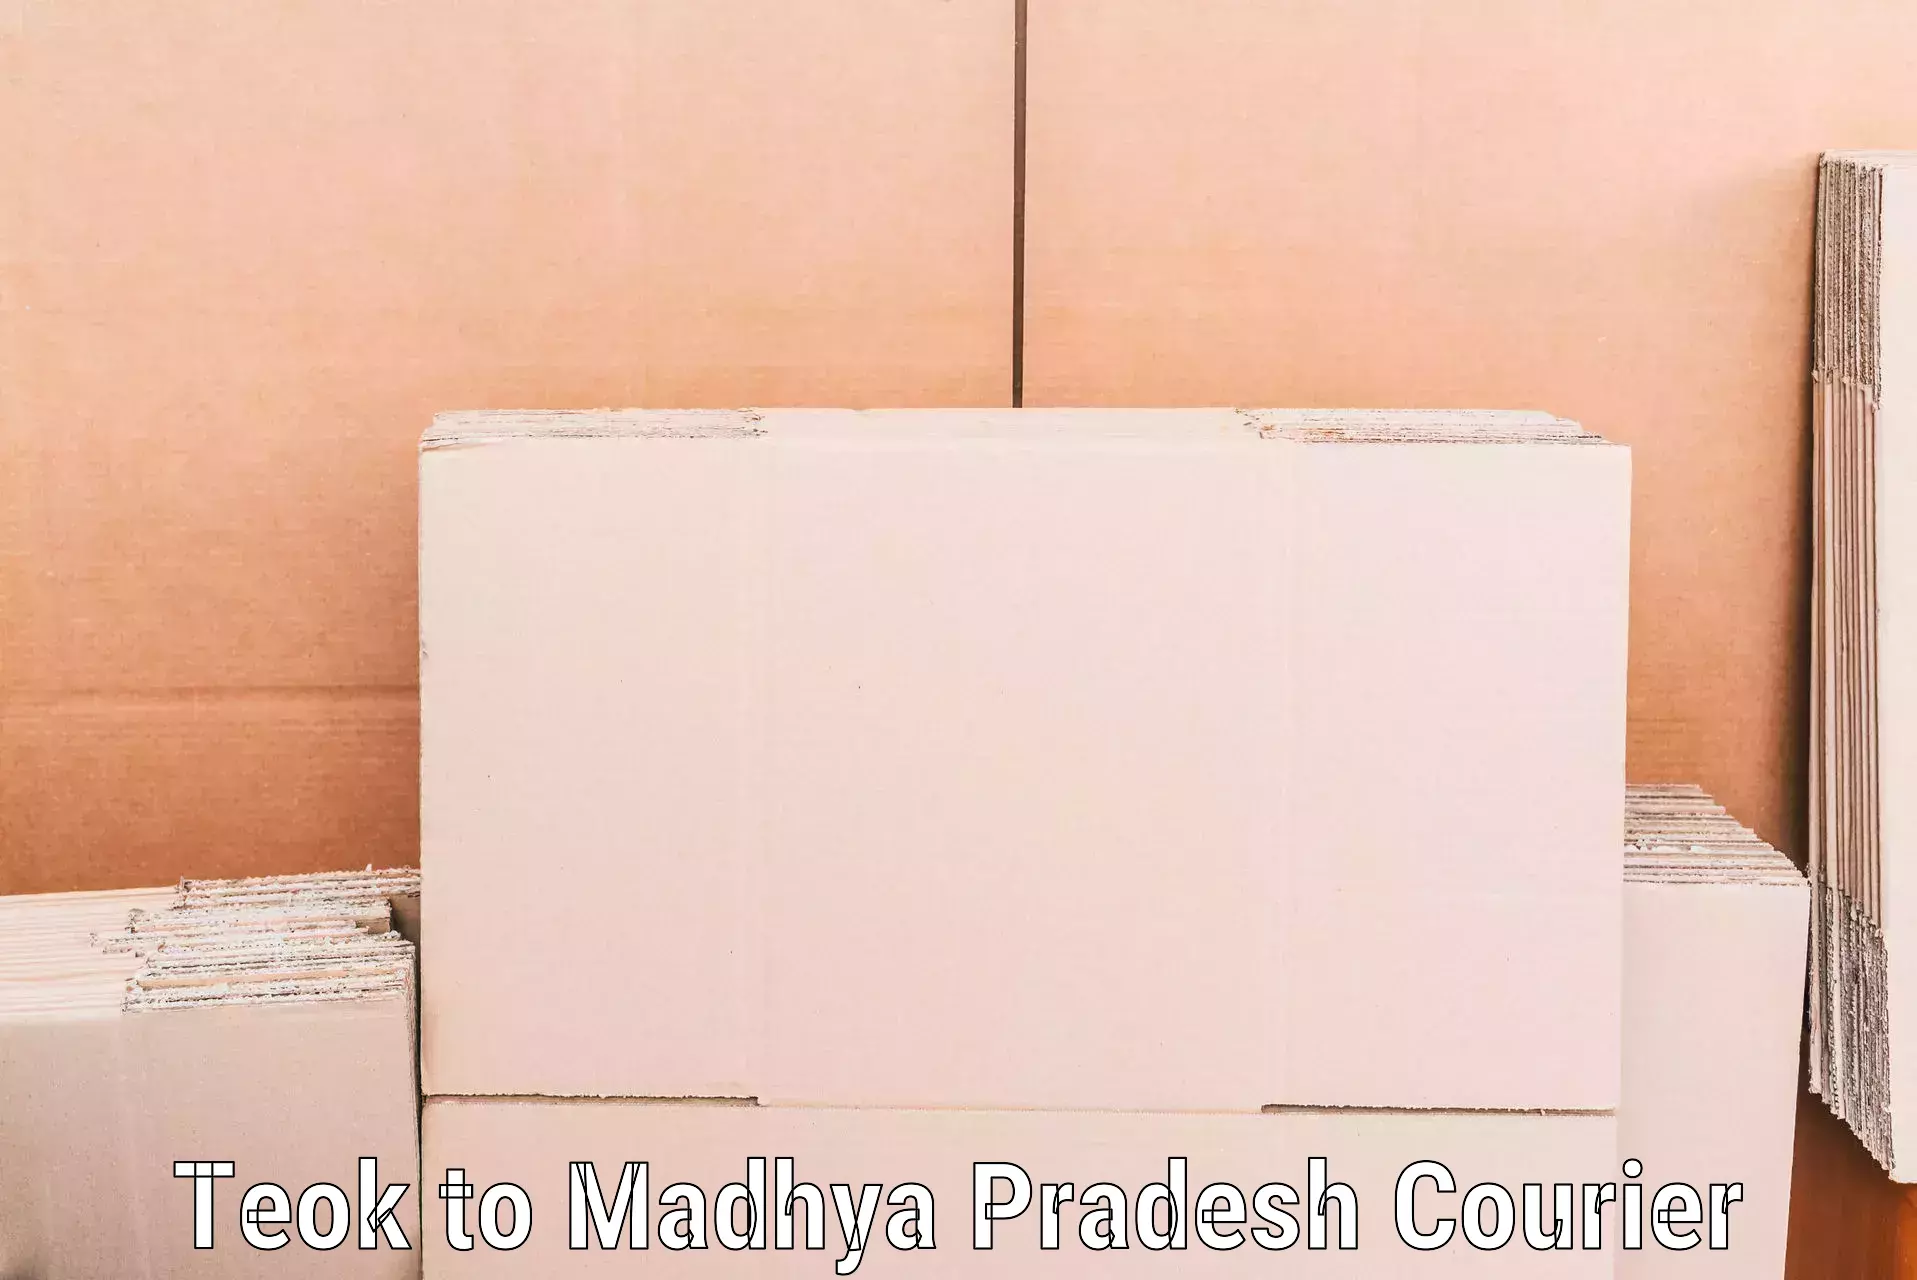 Moving and storage services in Teok to Mandsaur